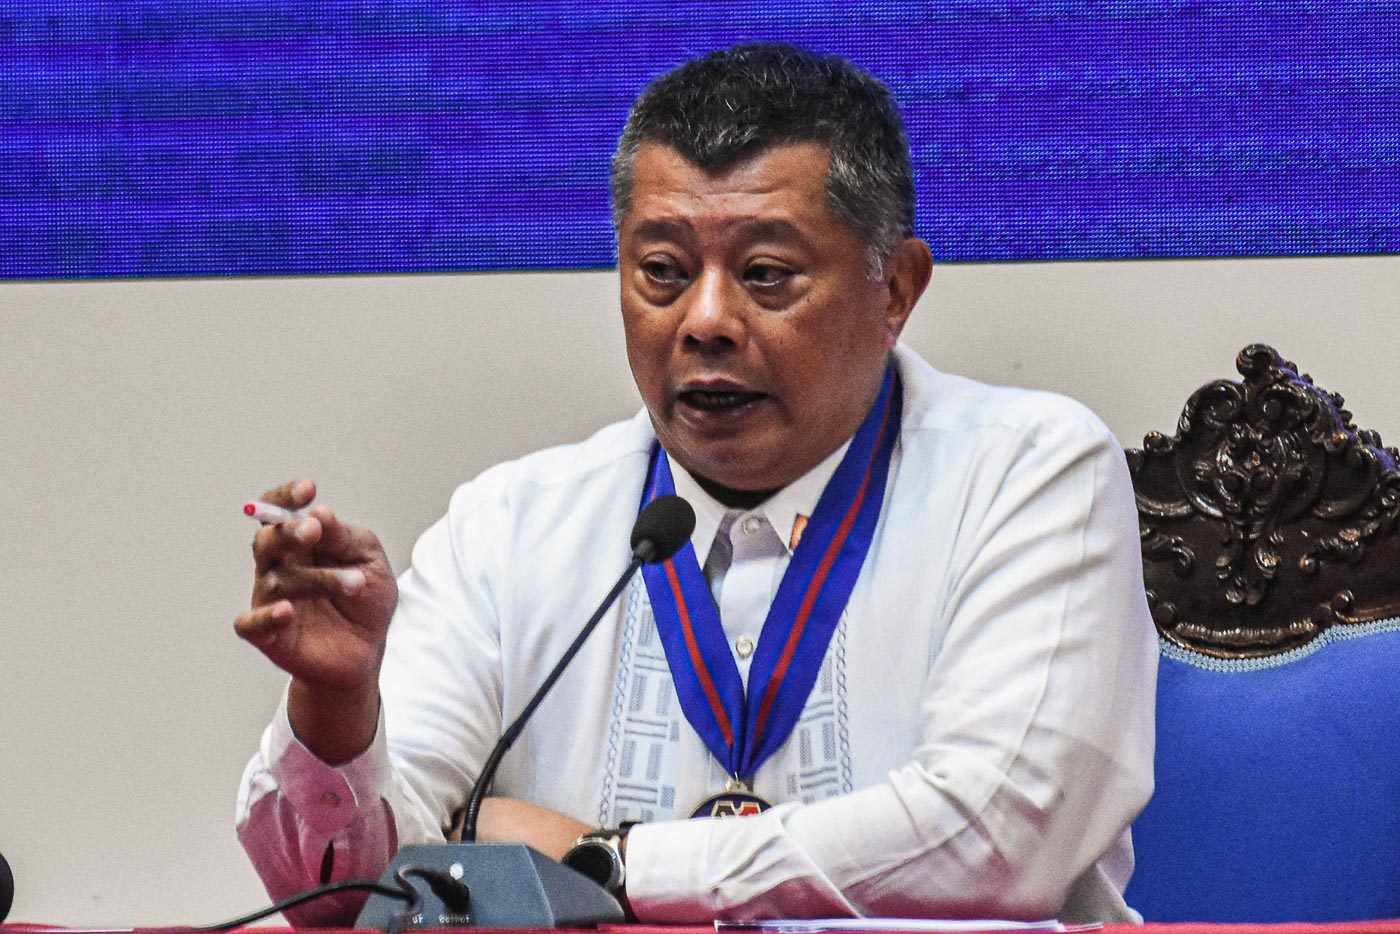 Remulla’s PCGG plan: Finish recovering Marcos ill-gotten wealth, manage other assets